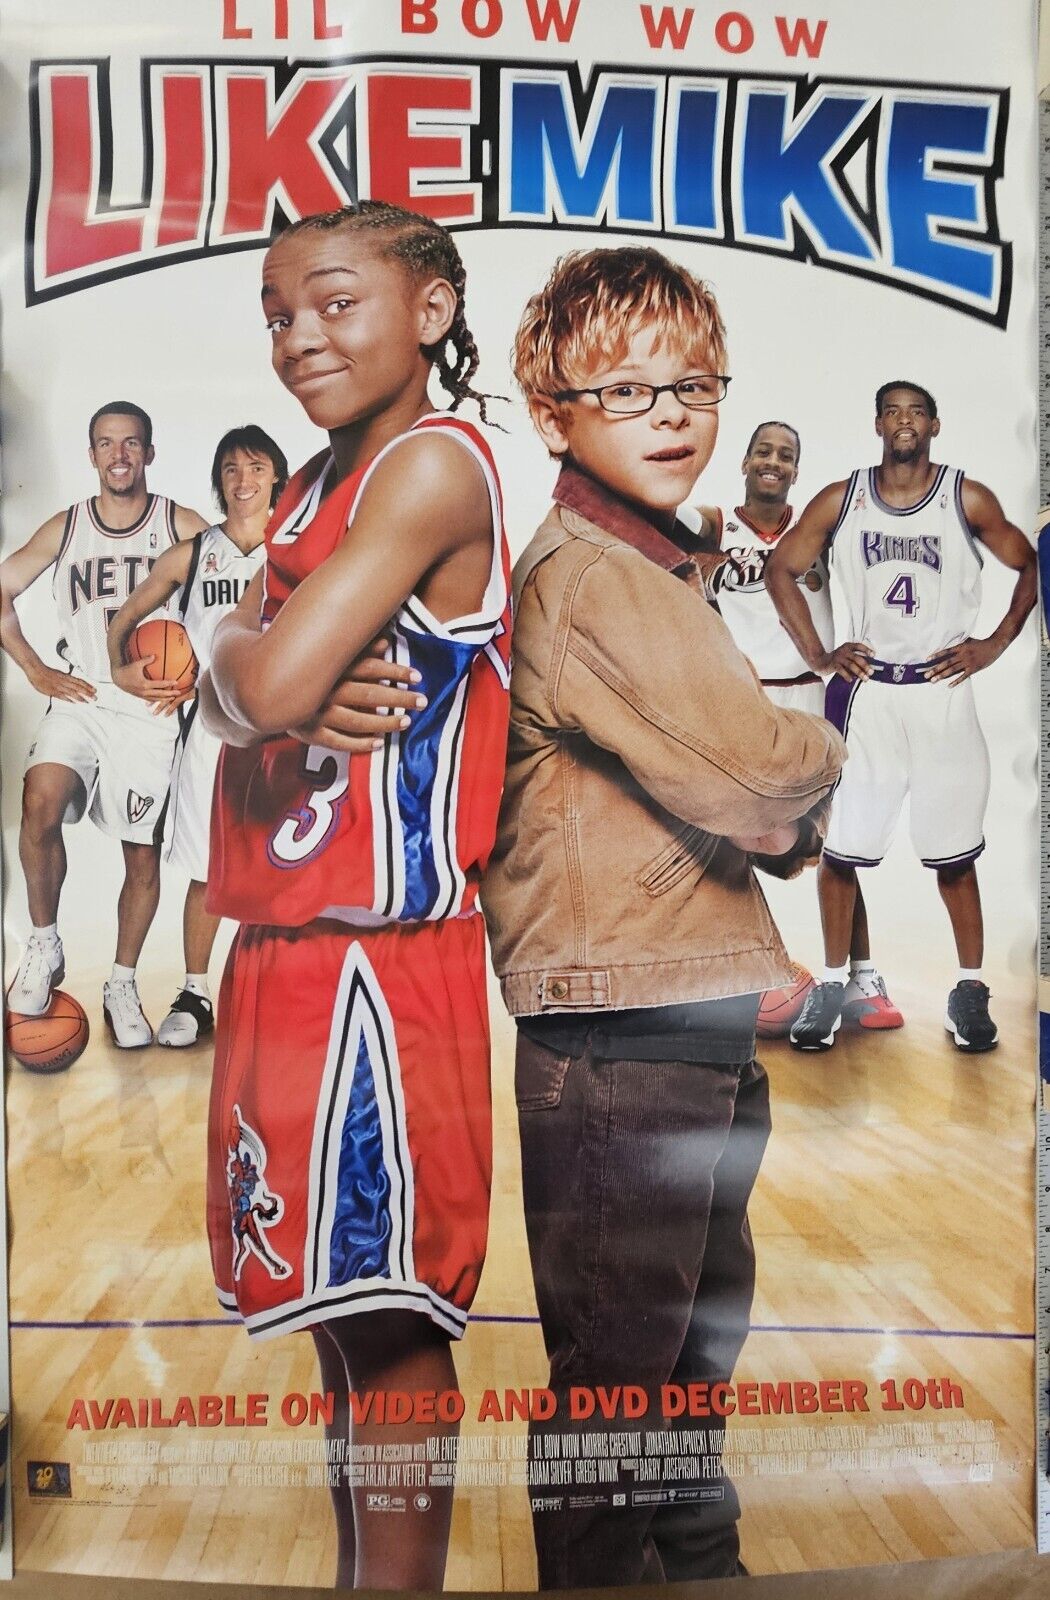 Lil Bow Wow in LIKE MIKE 27 39.5   DVD movie poster